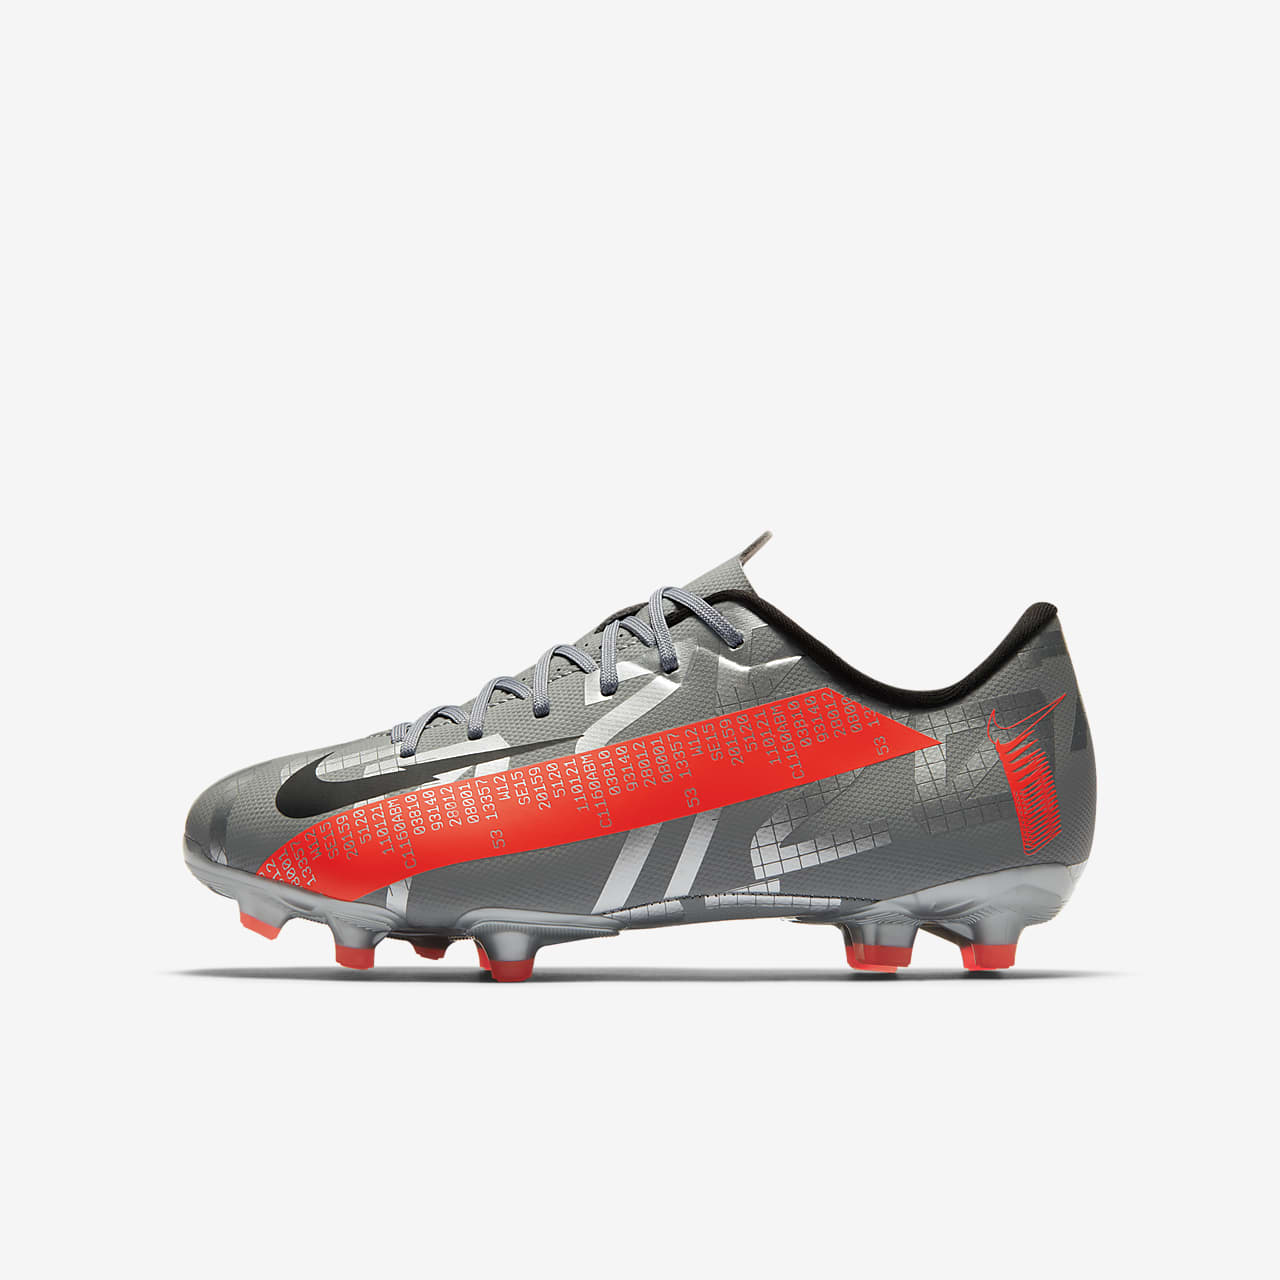 media the wind is strong banner Nike Jr. Mercurial Vapor 13 Academy MG Kids' Multi-Ground Football Boot.  Nike ID